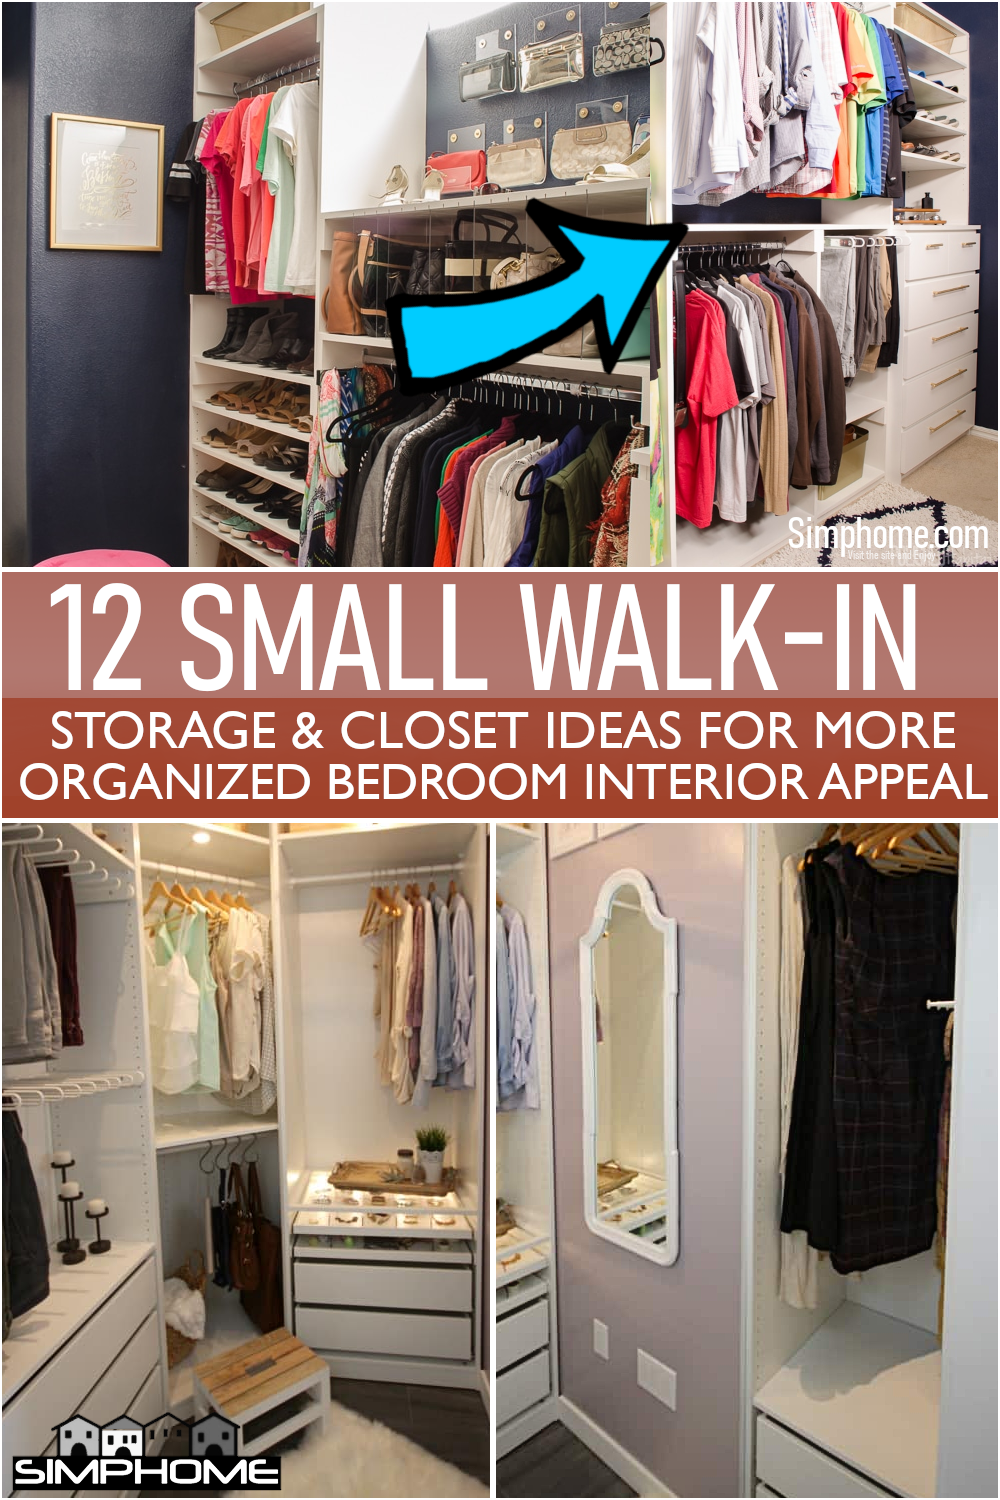 12 Small Walk-in Closet Storage Ideas for Bedrooms From Simphome